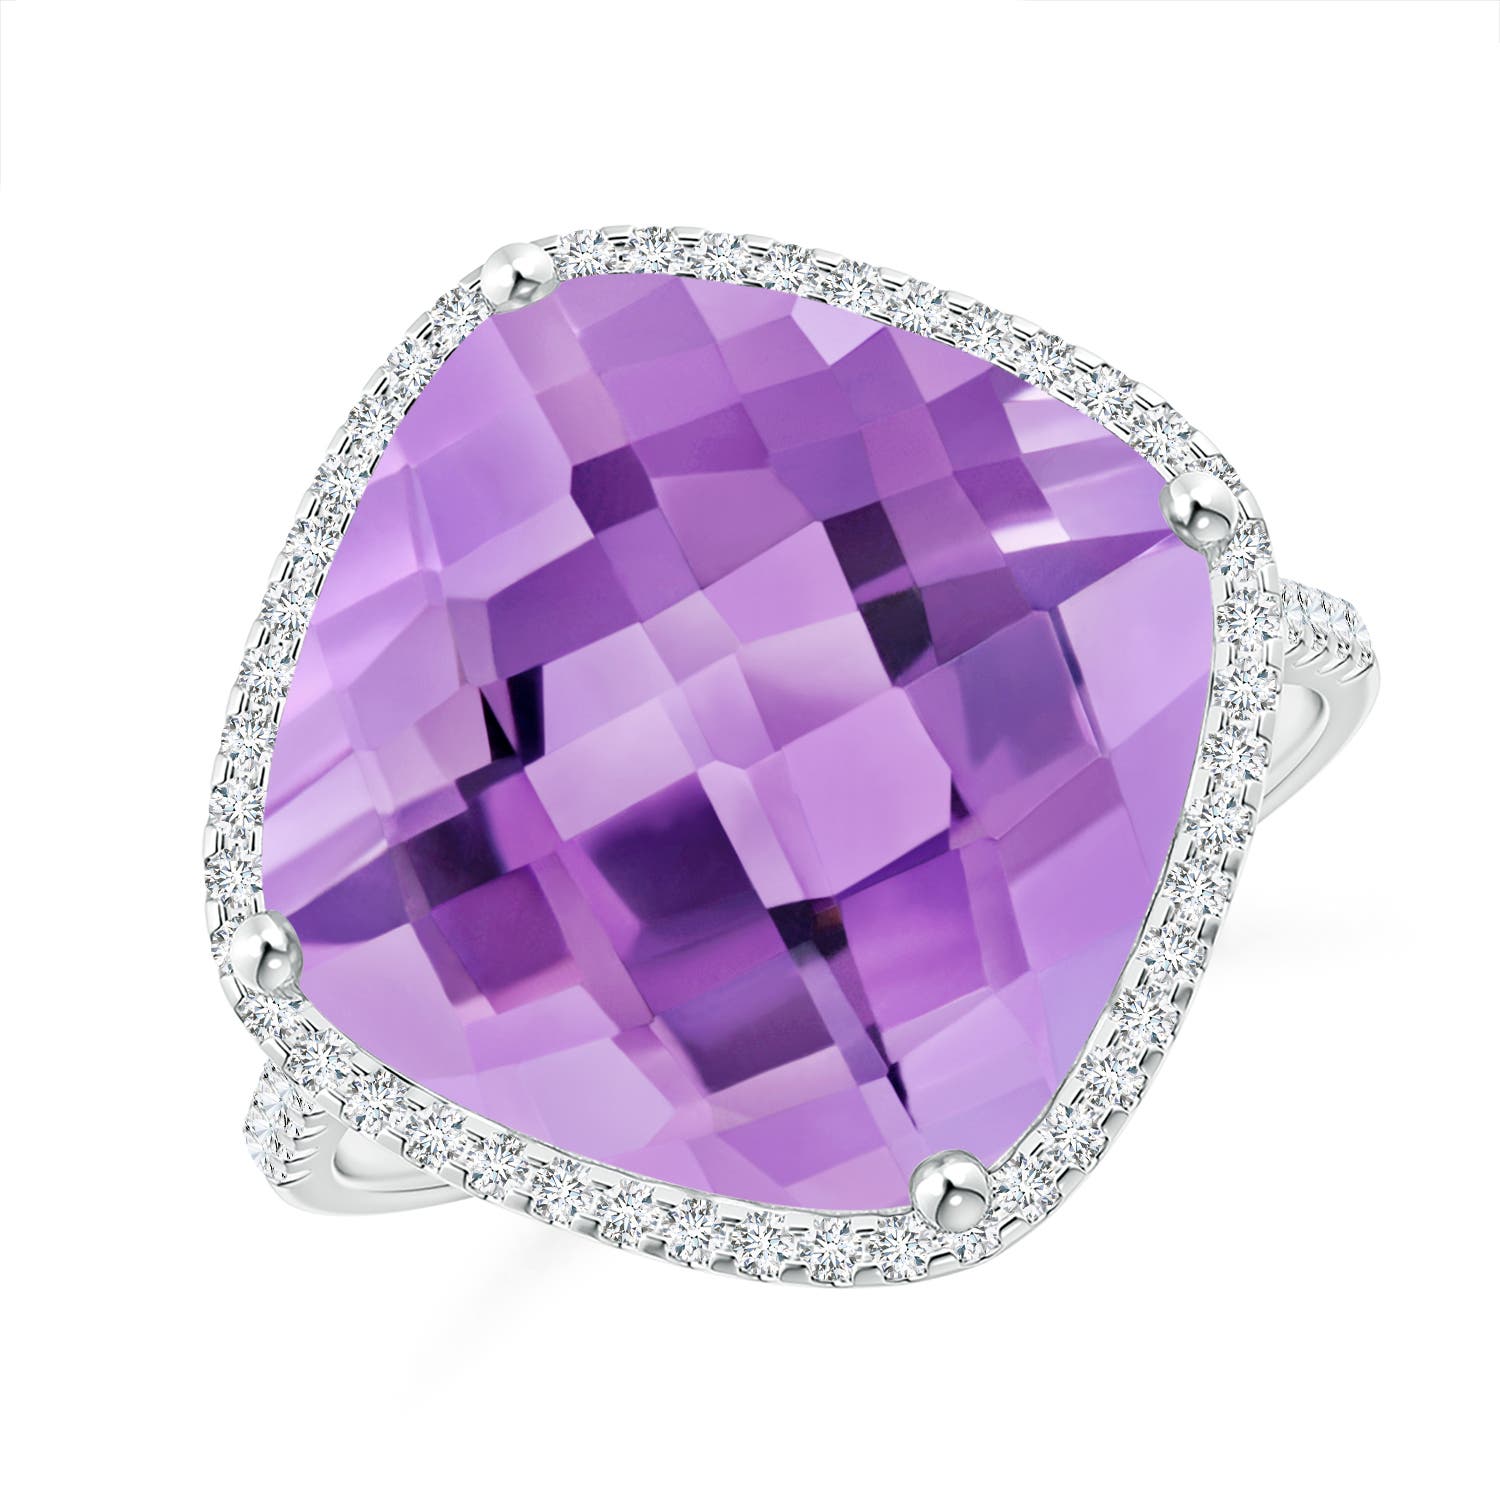 A - Amethyst / 8.32 CT / 14 KT White Gold